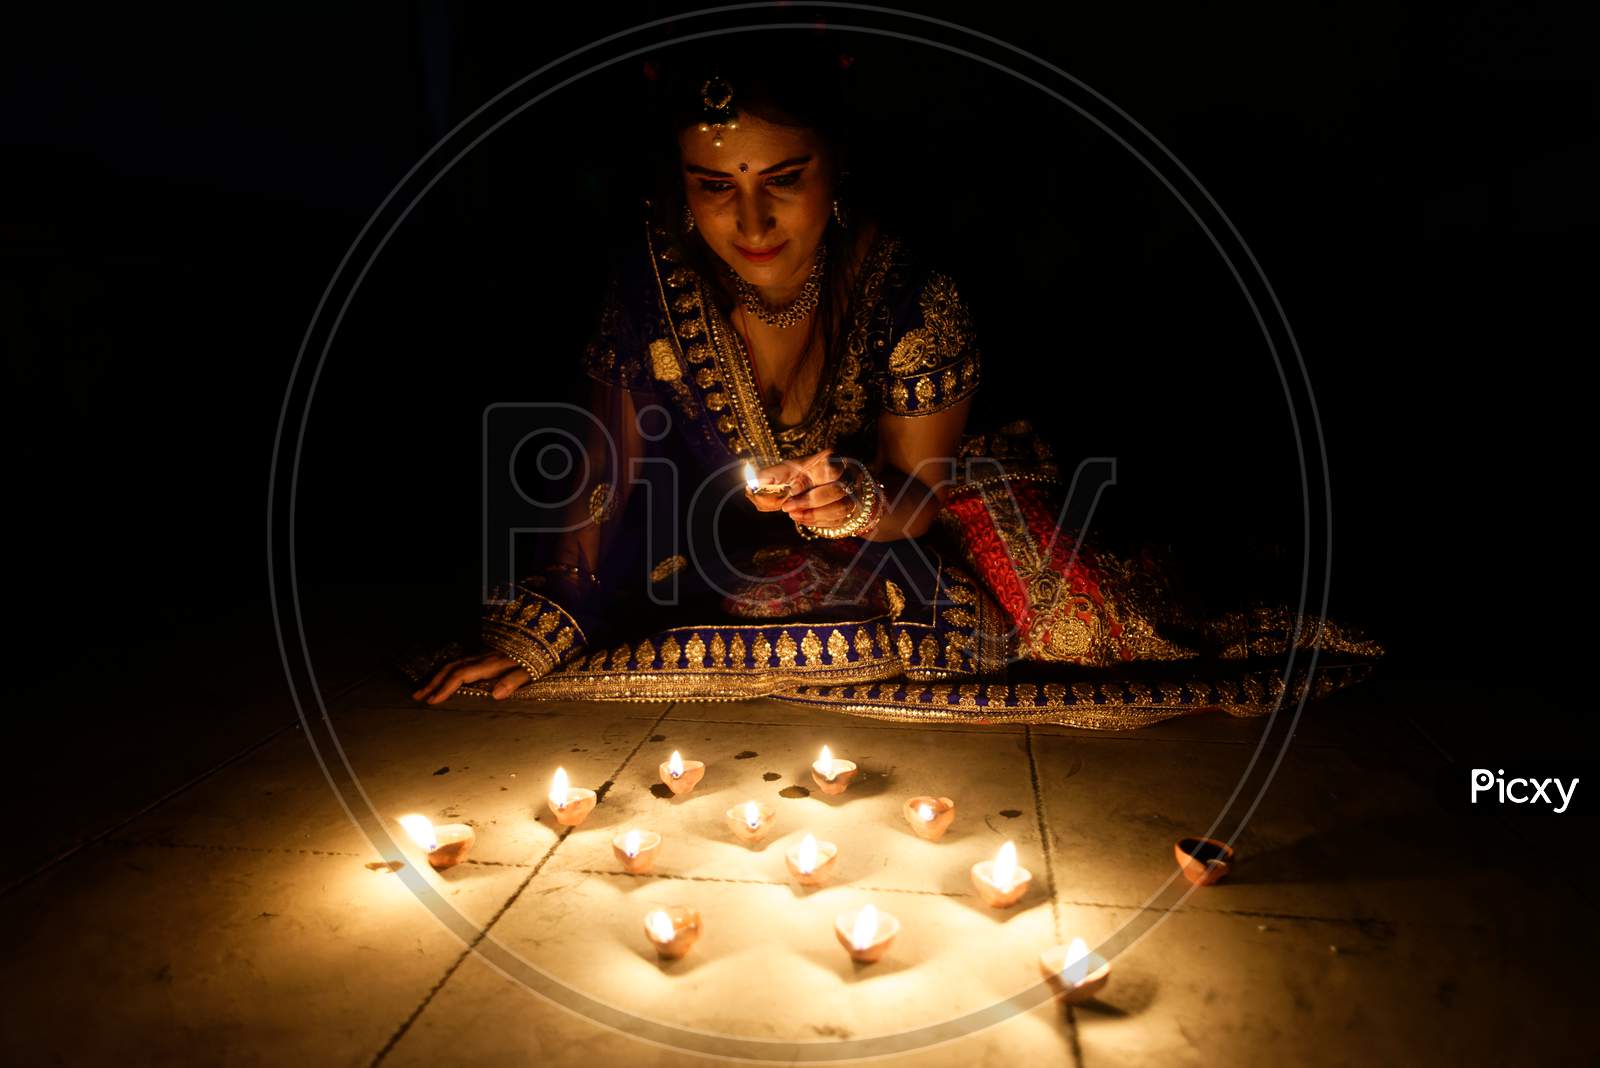 Young and beautiful Indian Gujarati woman in Indian traditional dress celebrating Diwali with illuminated diya/lamps on rooftop on Diwali evening. Indian lifestyle and Diwali celebration